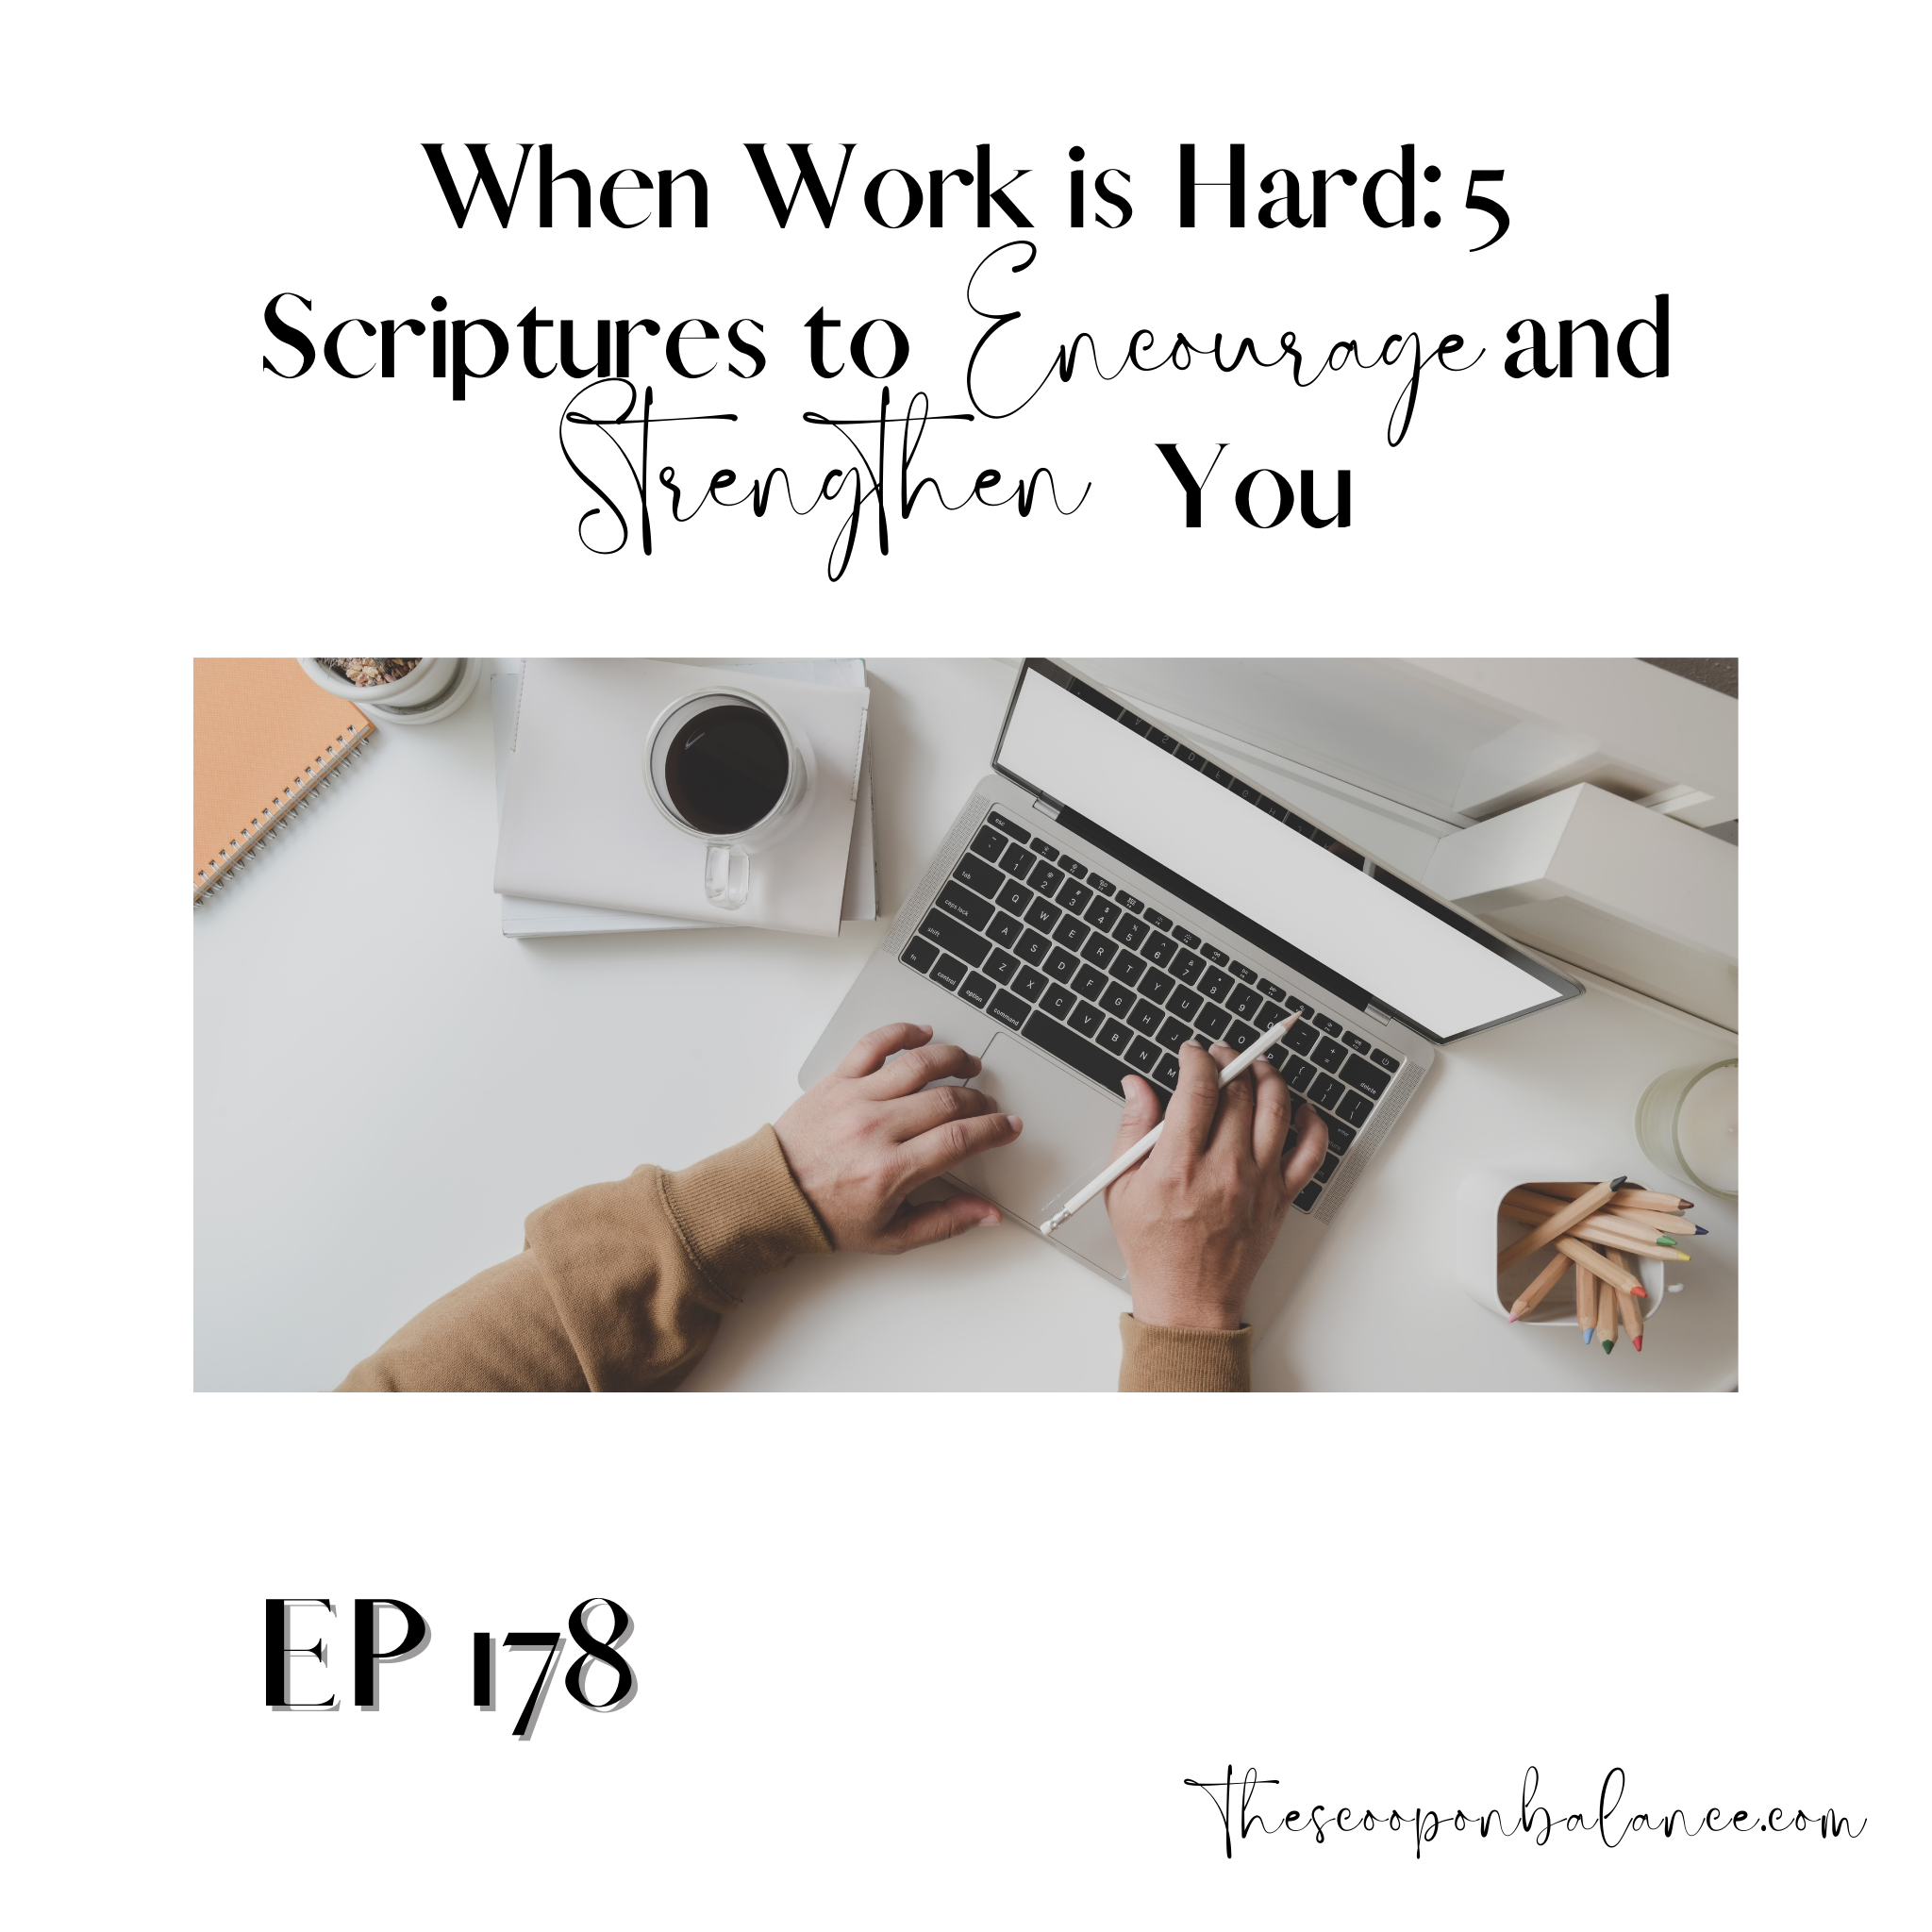 Ep 178: When Work is Hard: 5 Scriptures to Encourage and Strengthen You